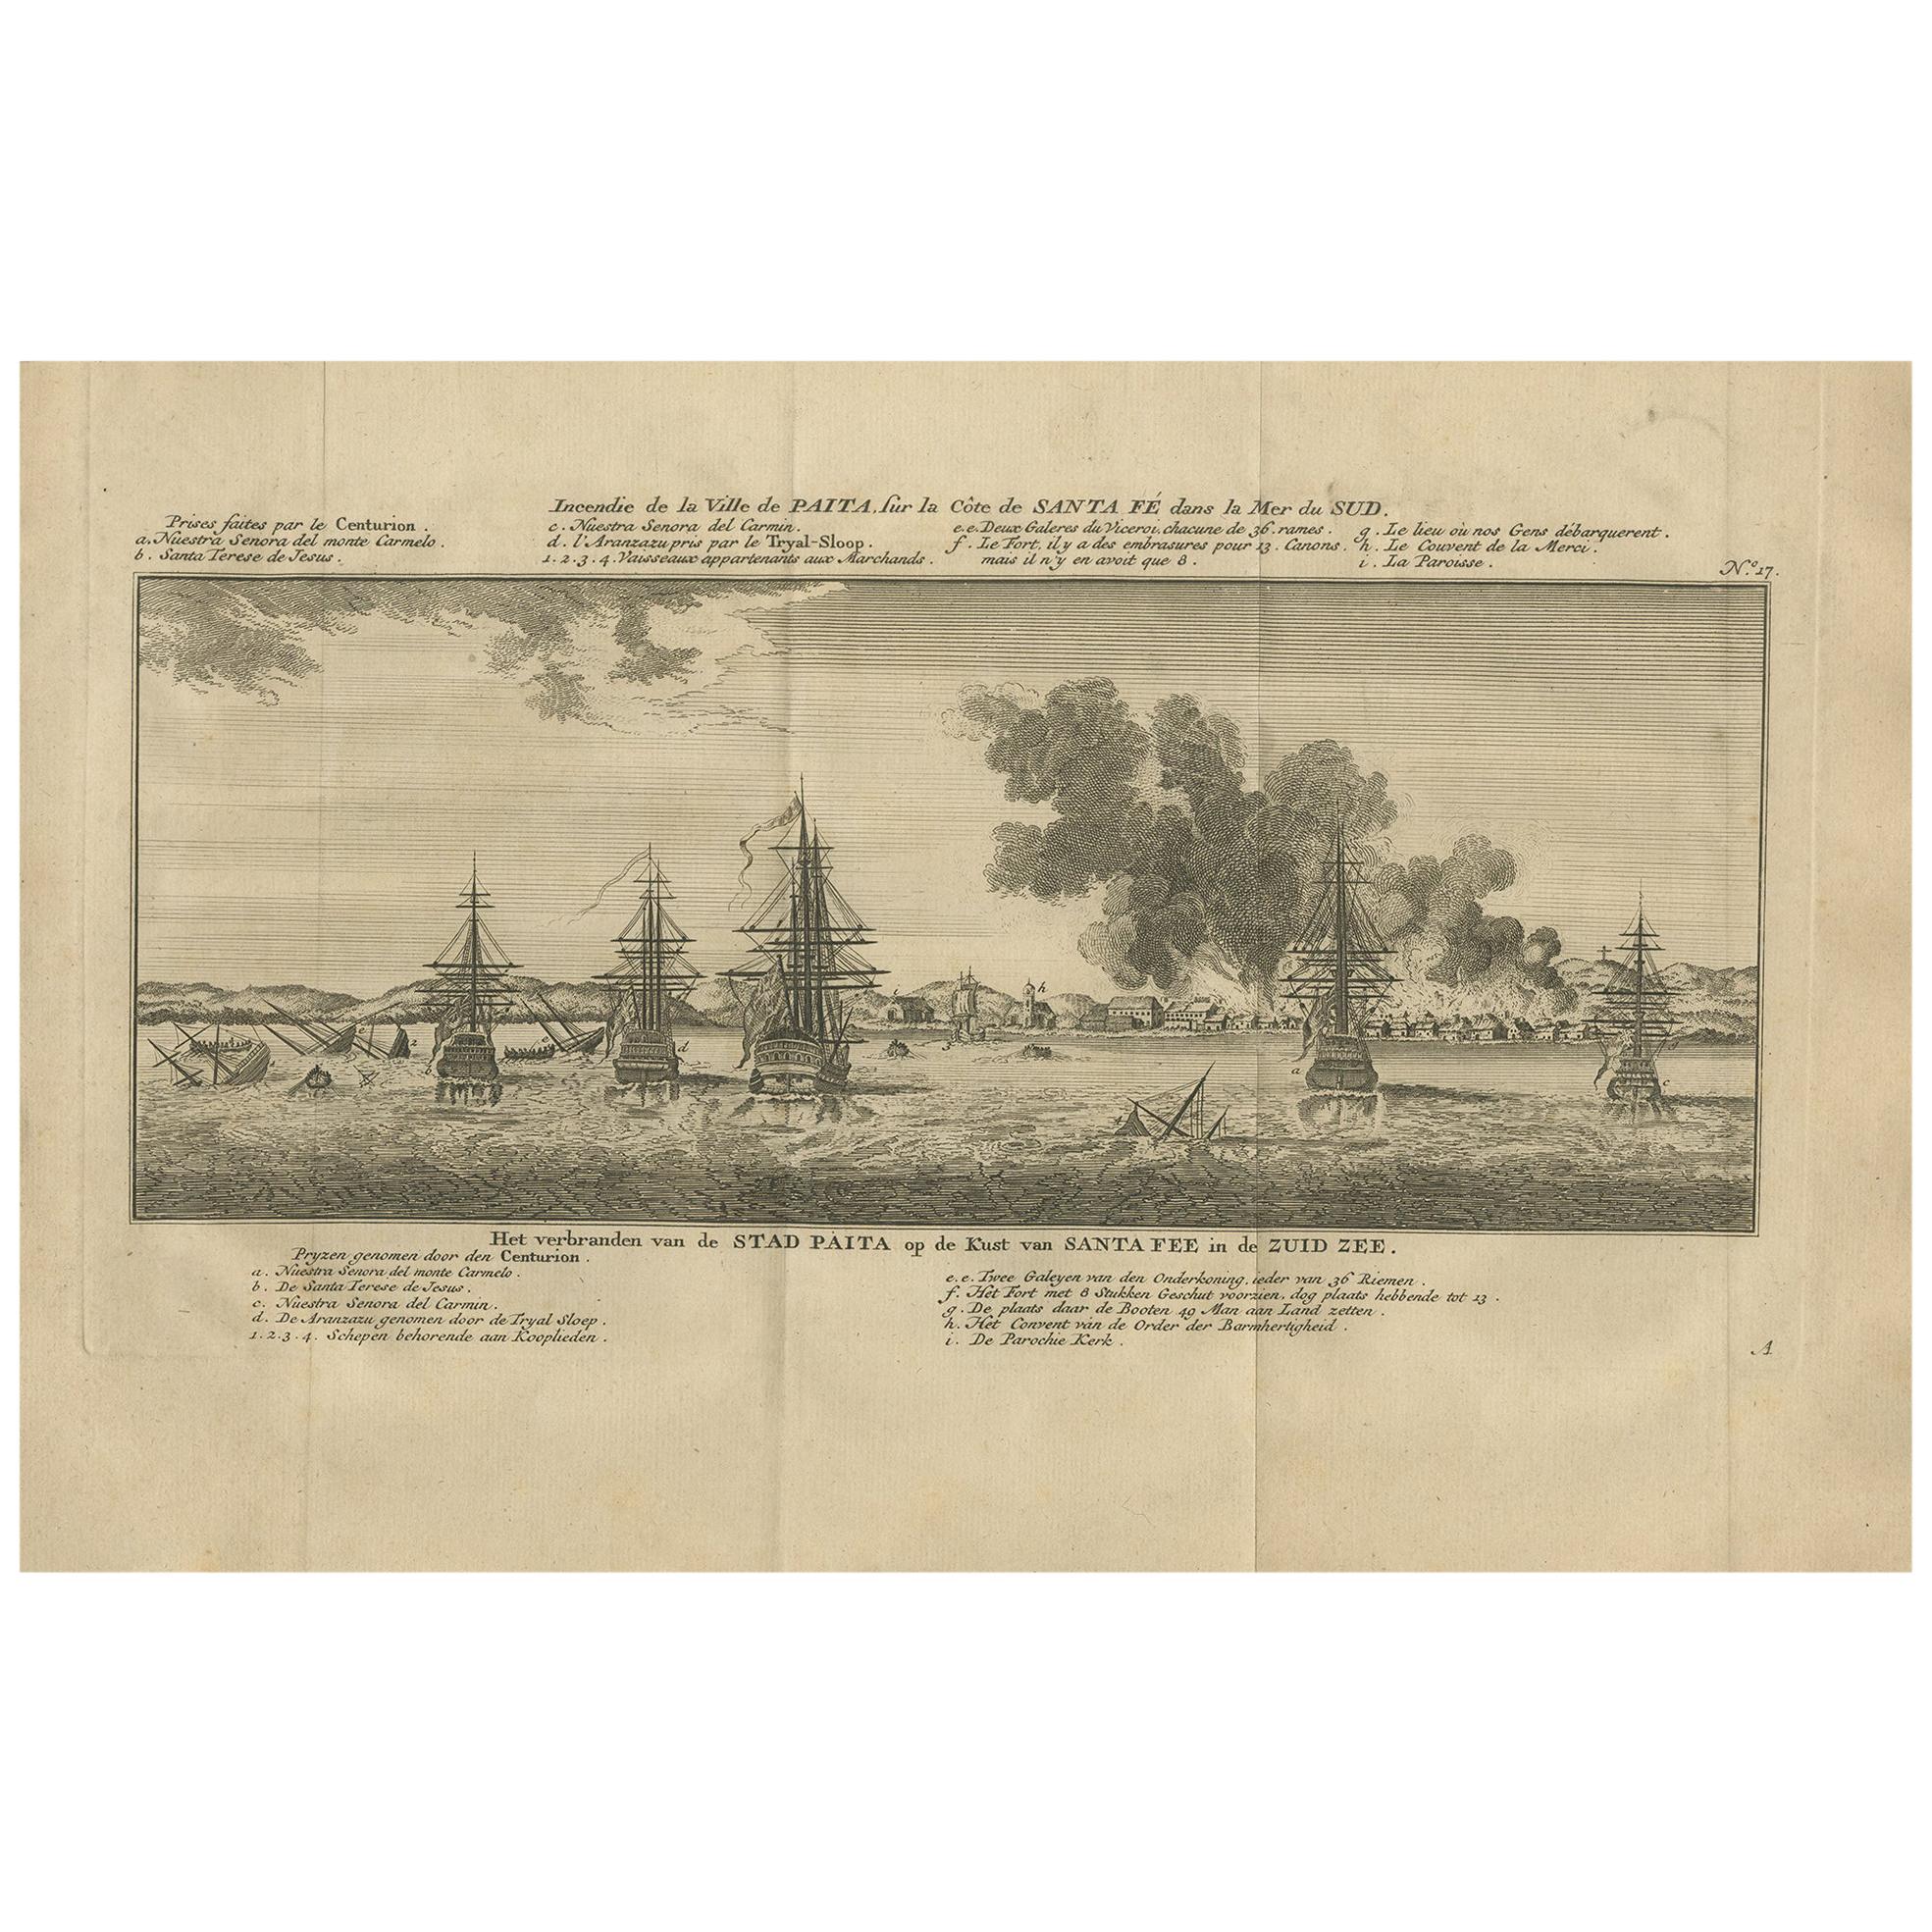 Antique Print of the City of Paita by Anson '1749' For Sale